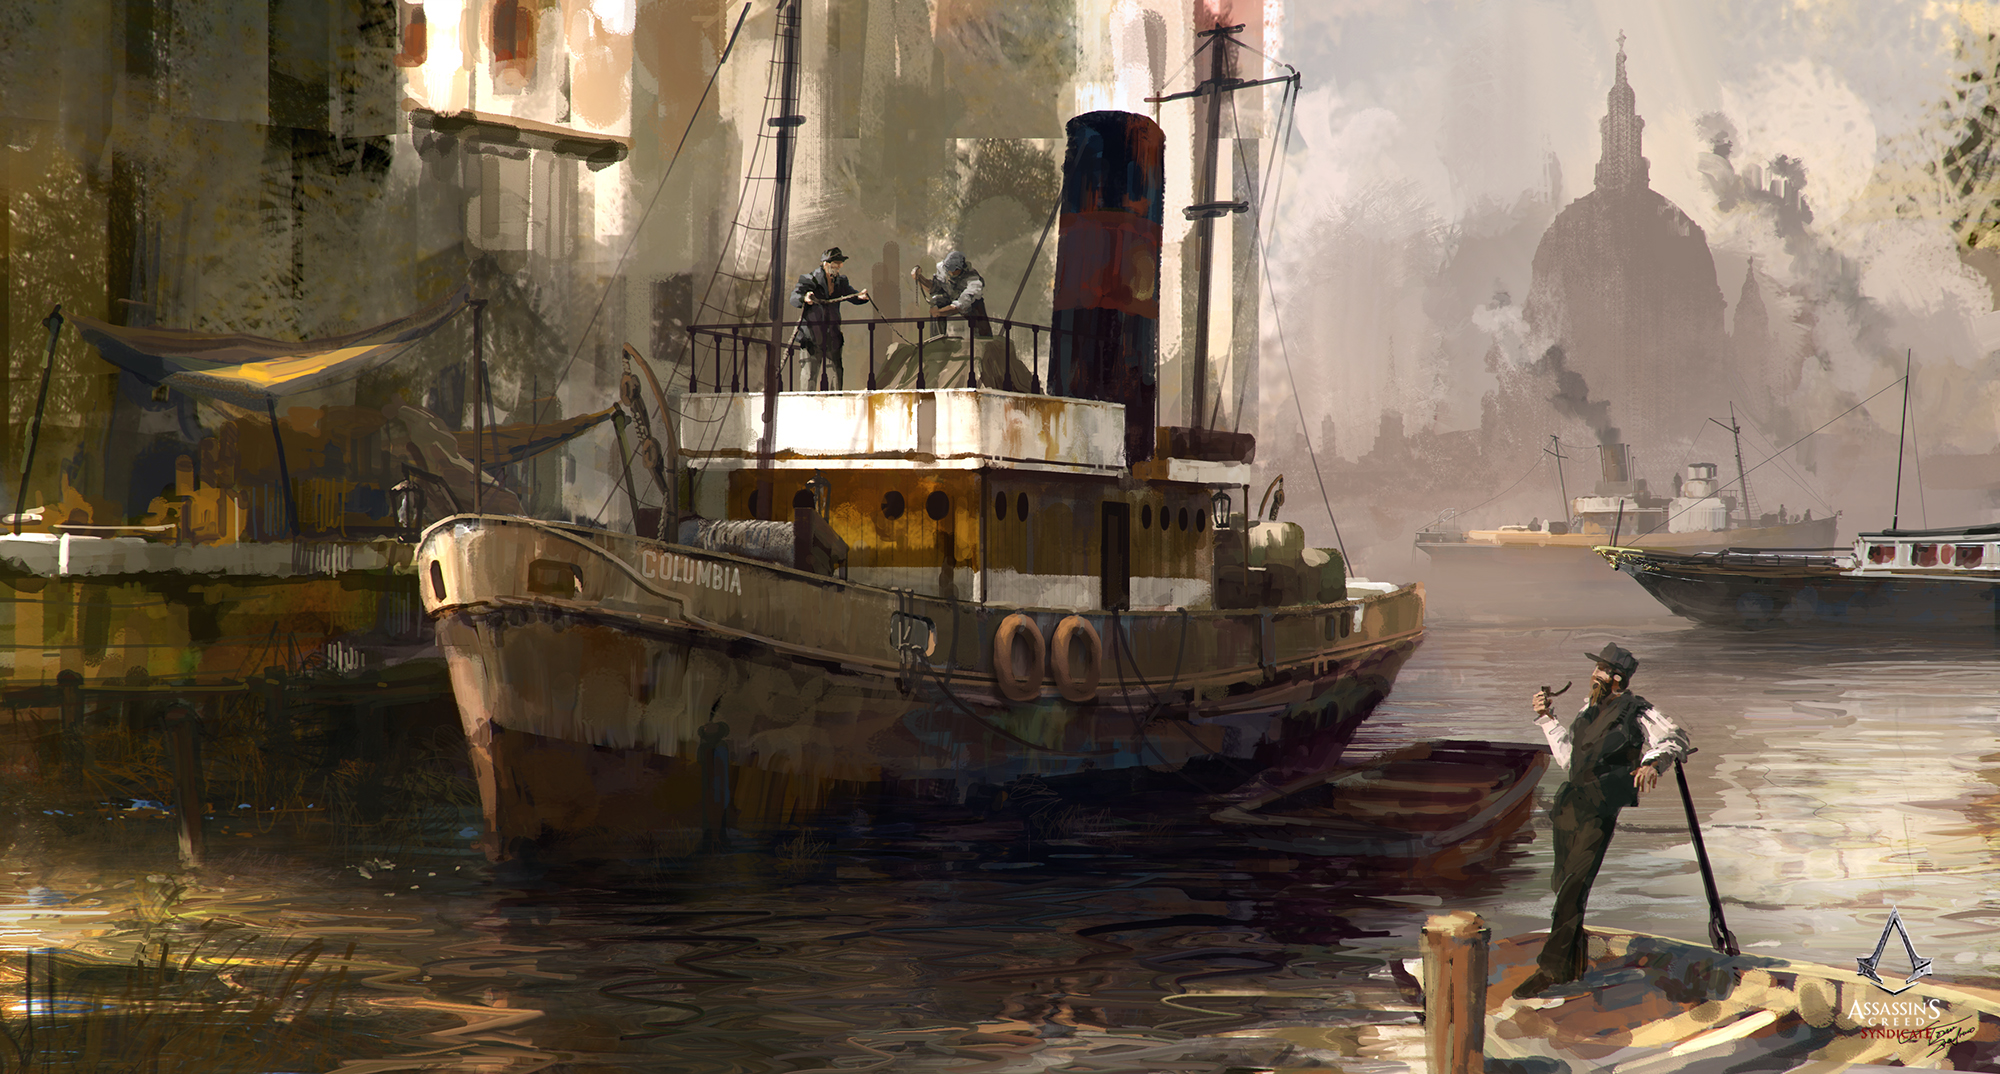 Assassin’s Creed Syndicate concept art